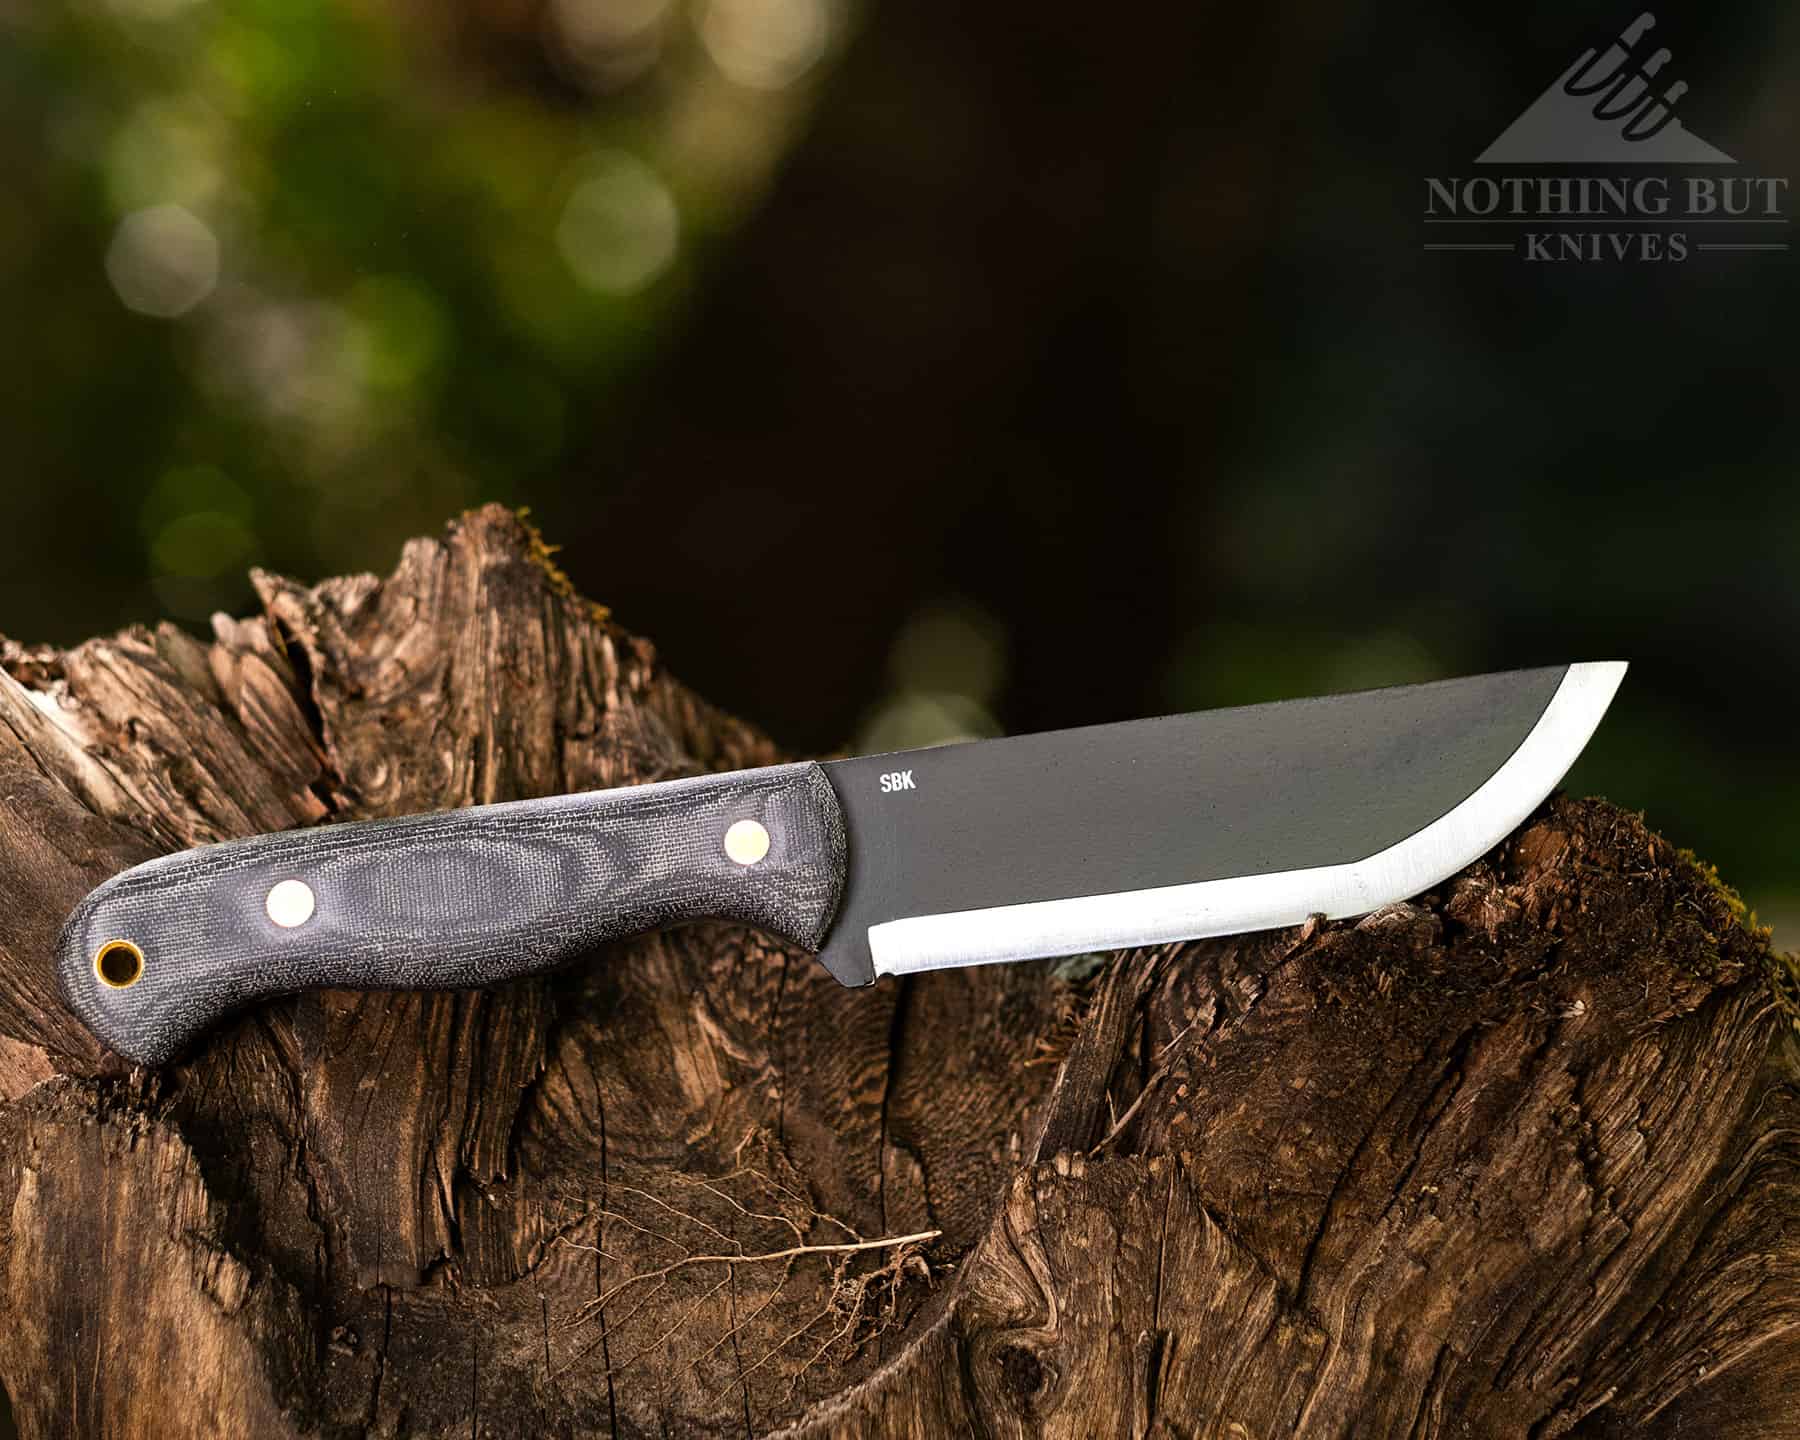 The Condor SBK is one of the top Bushcraft knives we have tested in the under $200 range.